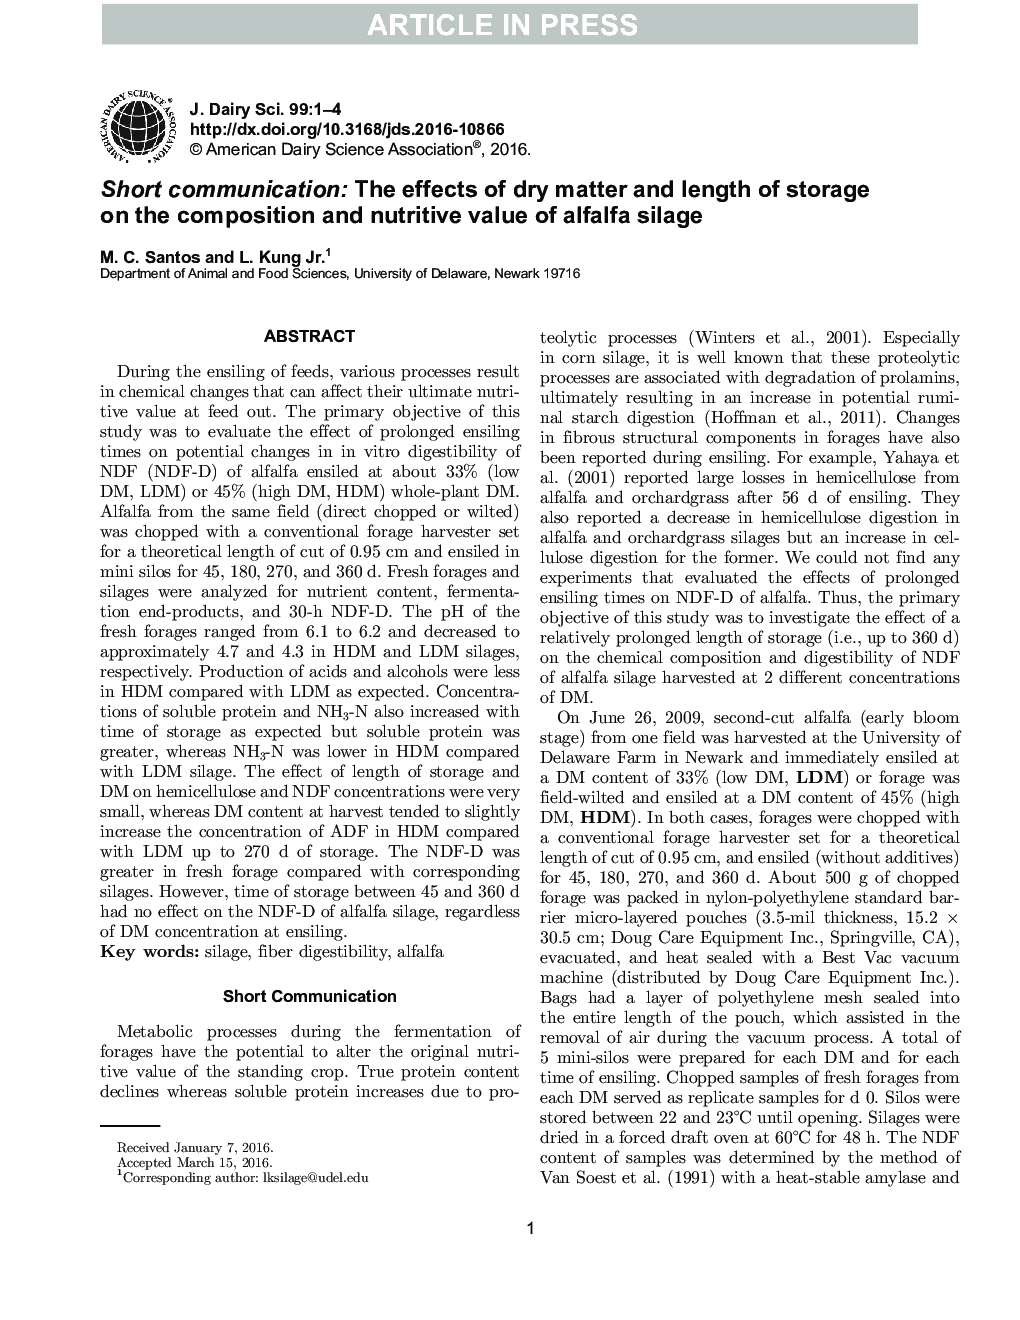 Short communication: The effects of dry matter and length of storage on the composition and nutritive value of alfalfa silage